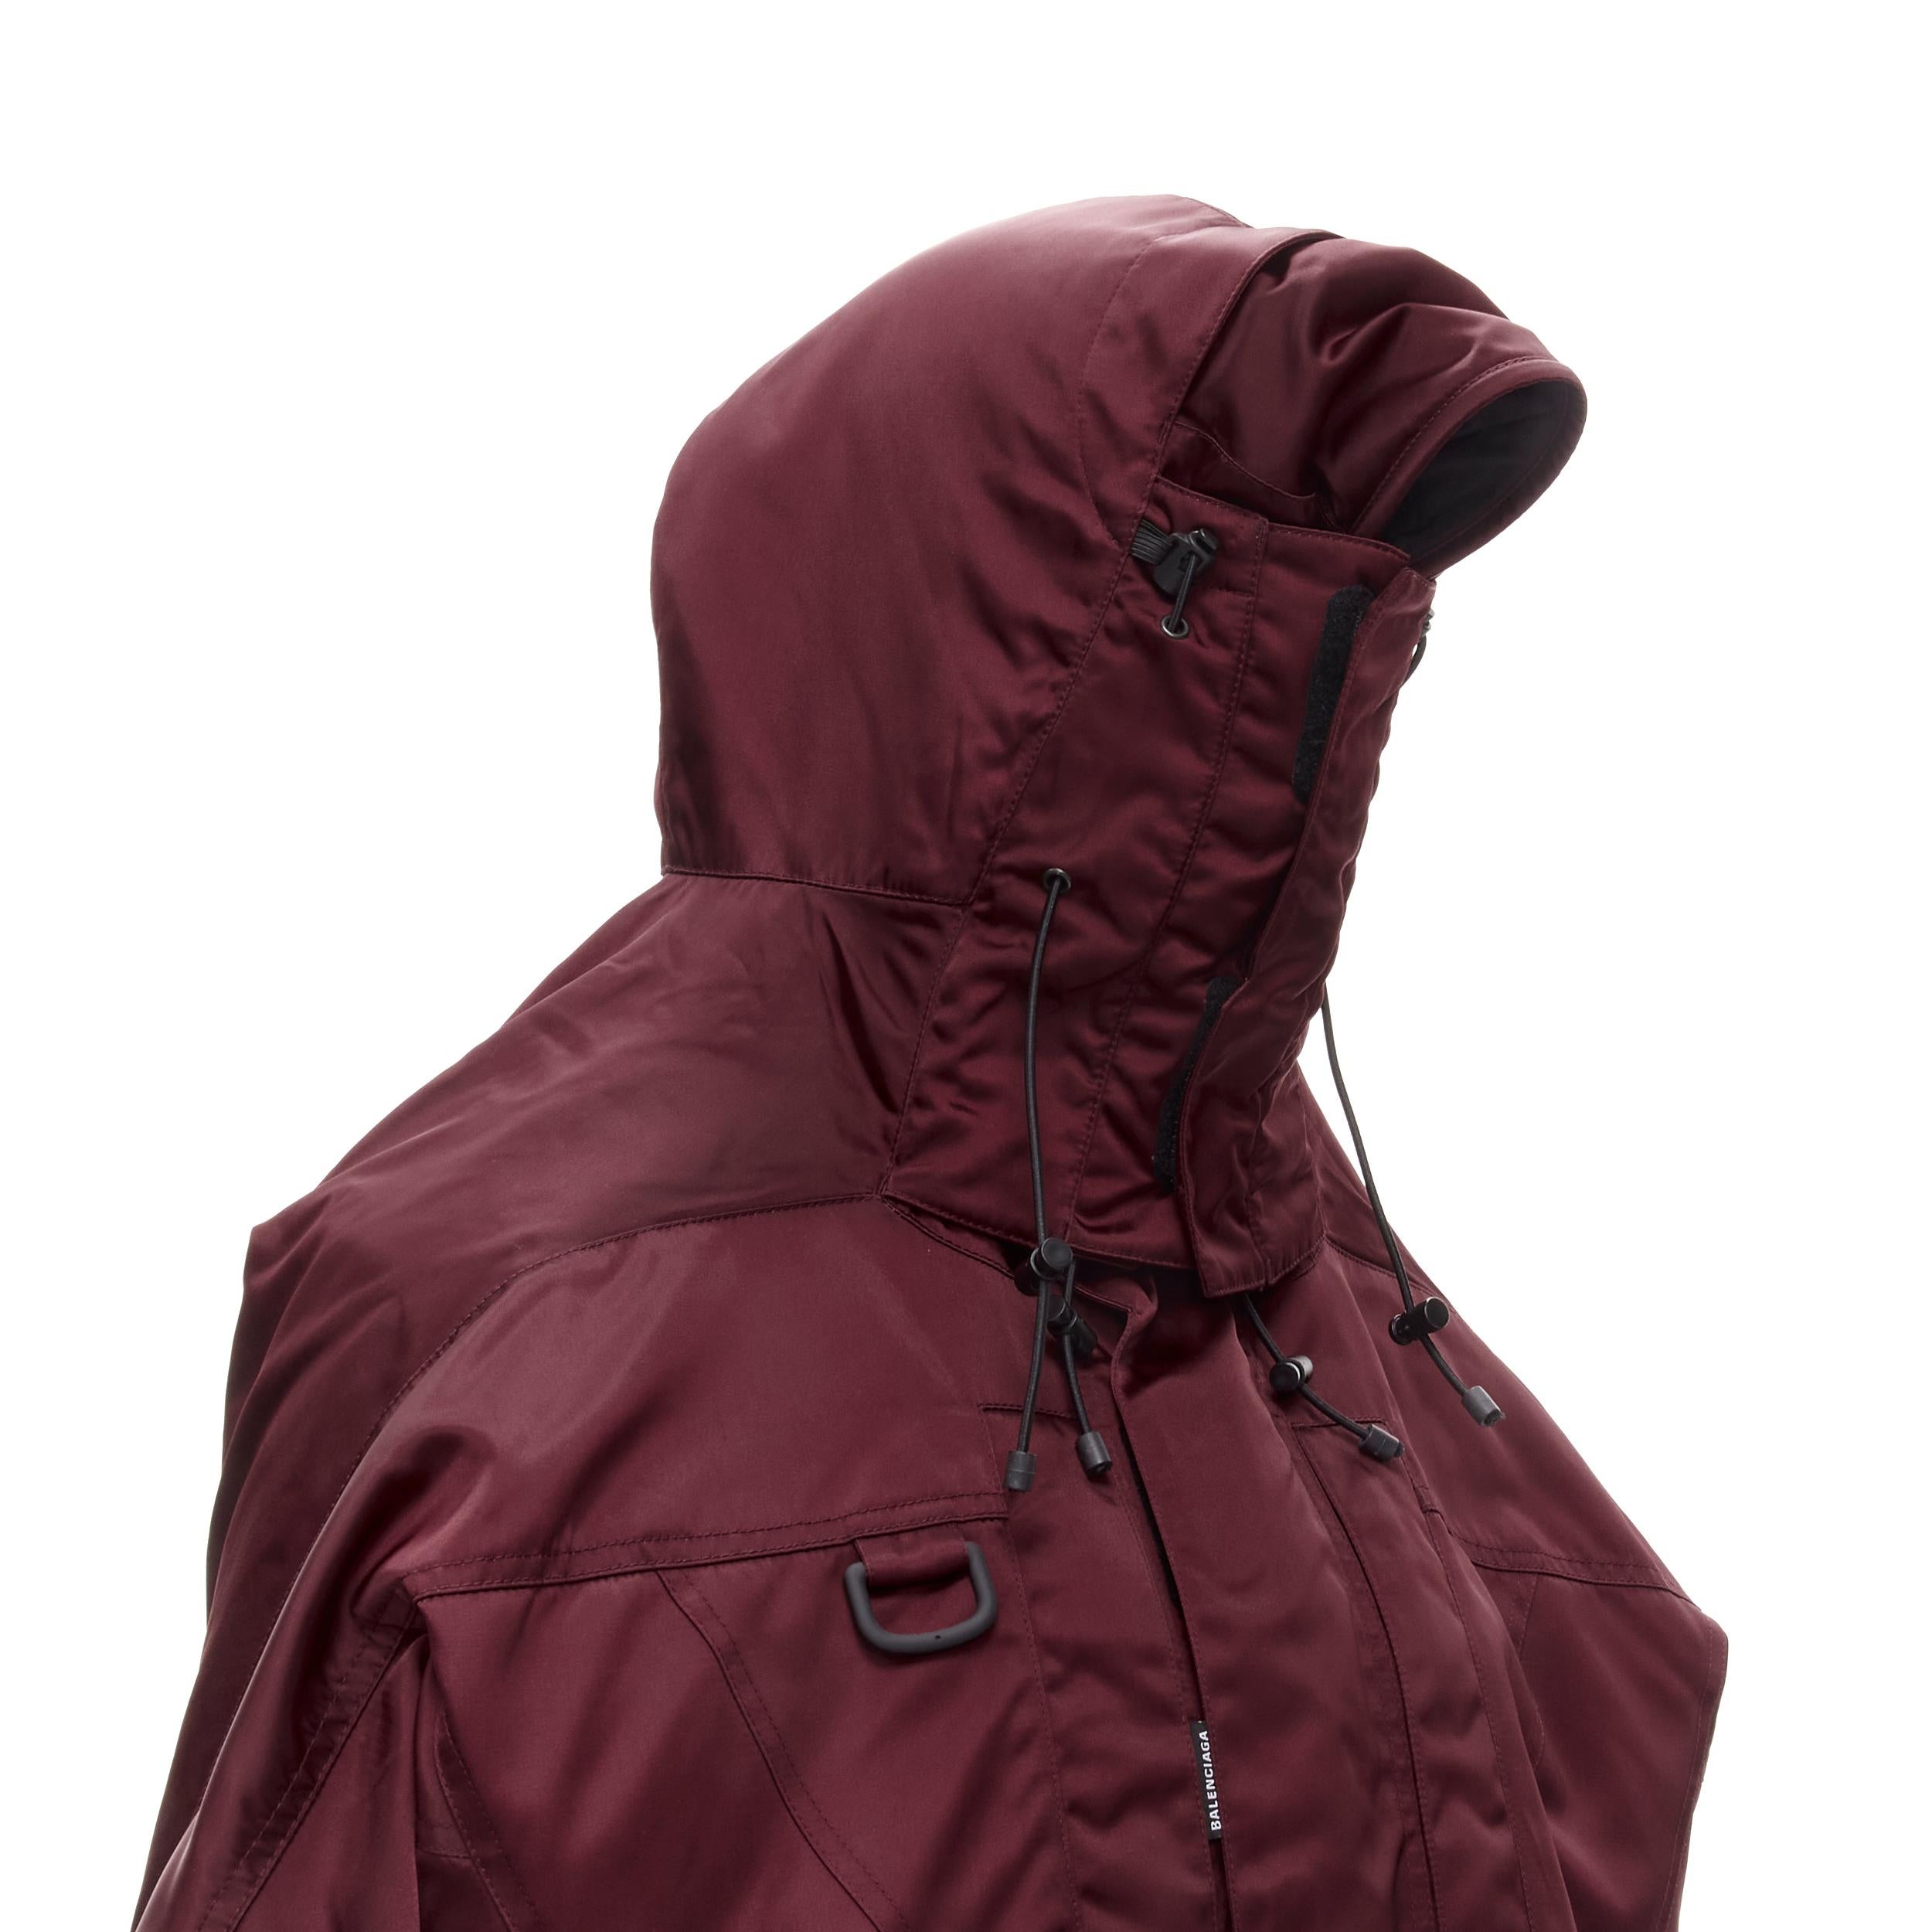 BALENCIAGA Demna burgundy red oversized hooded quilted ski jacket coat
Brand: Balenciaga
Designer: Demna
Color: Burgundy
Pattern: Solid
Closure: Zip
Extra Detail: Techno Synthetic nylon fabric, logo on side front zip, hooded collar, single breasted,